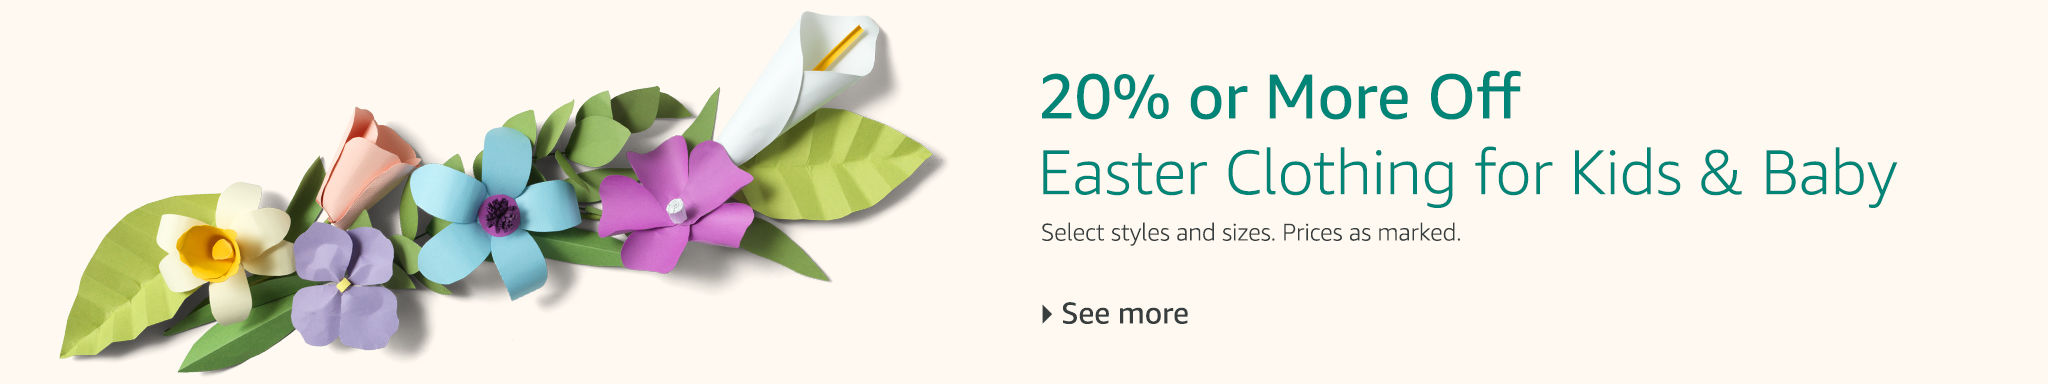 20% or More Off Easter Clothing for Kids & Baby